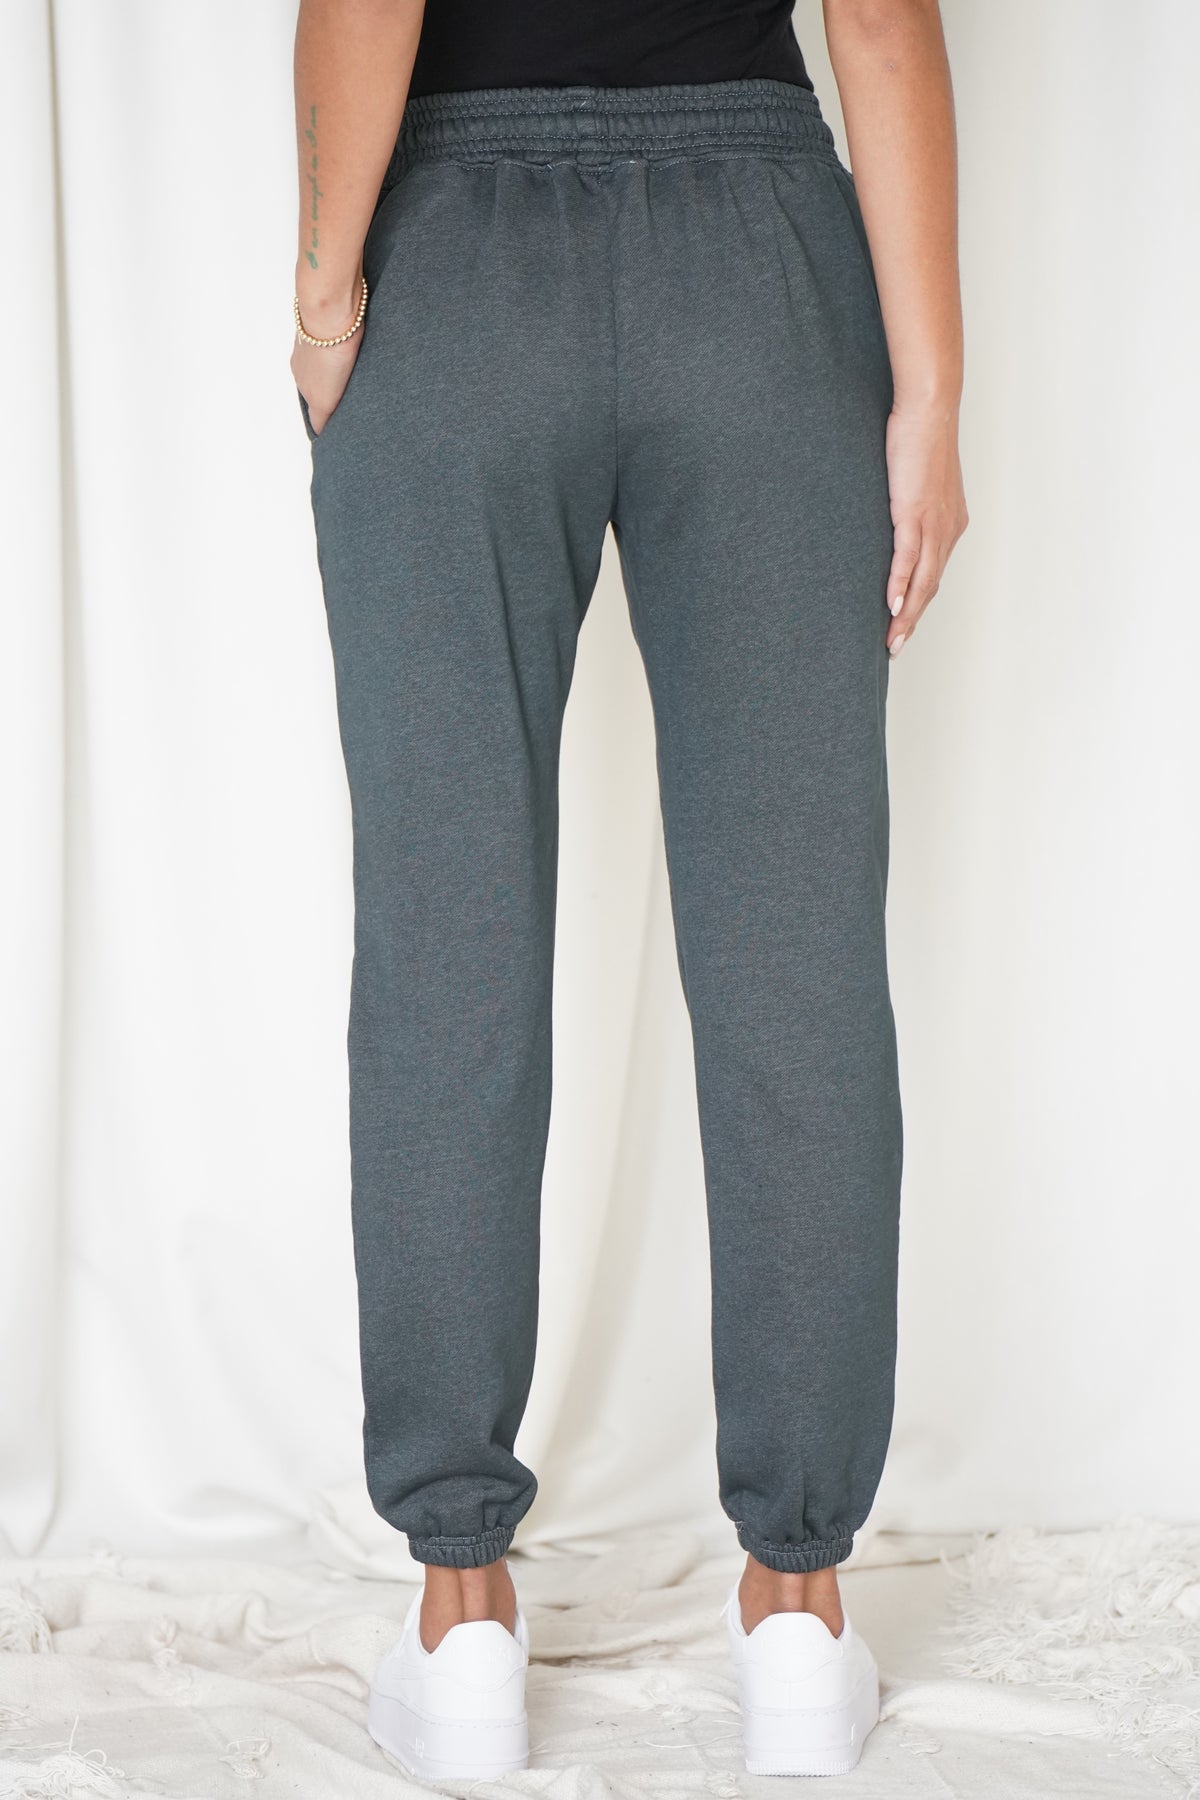 TONAL HEART EMBROIDERED JOGGERS